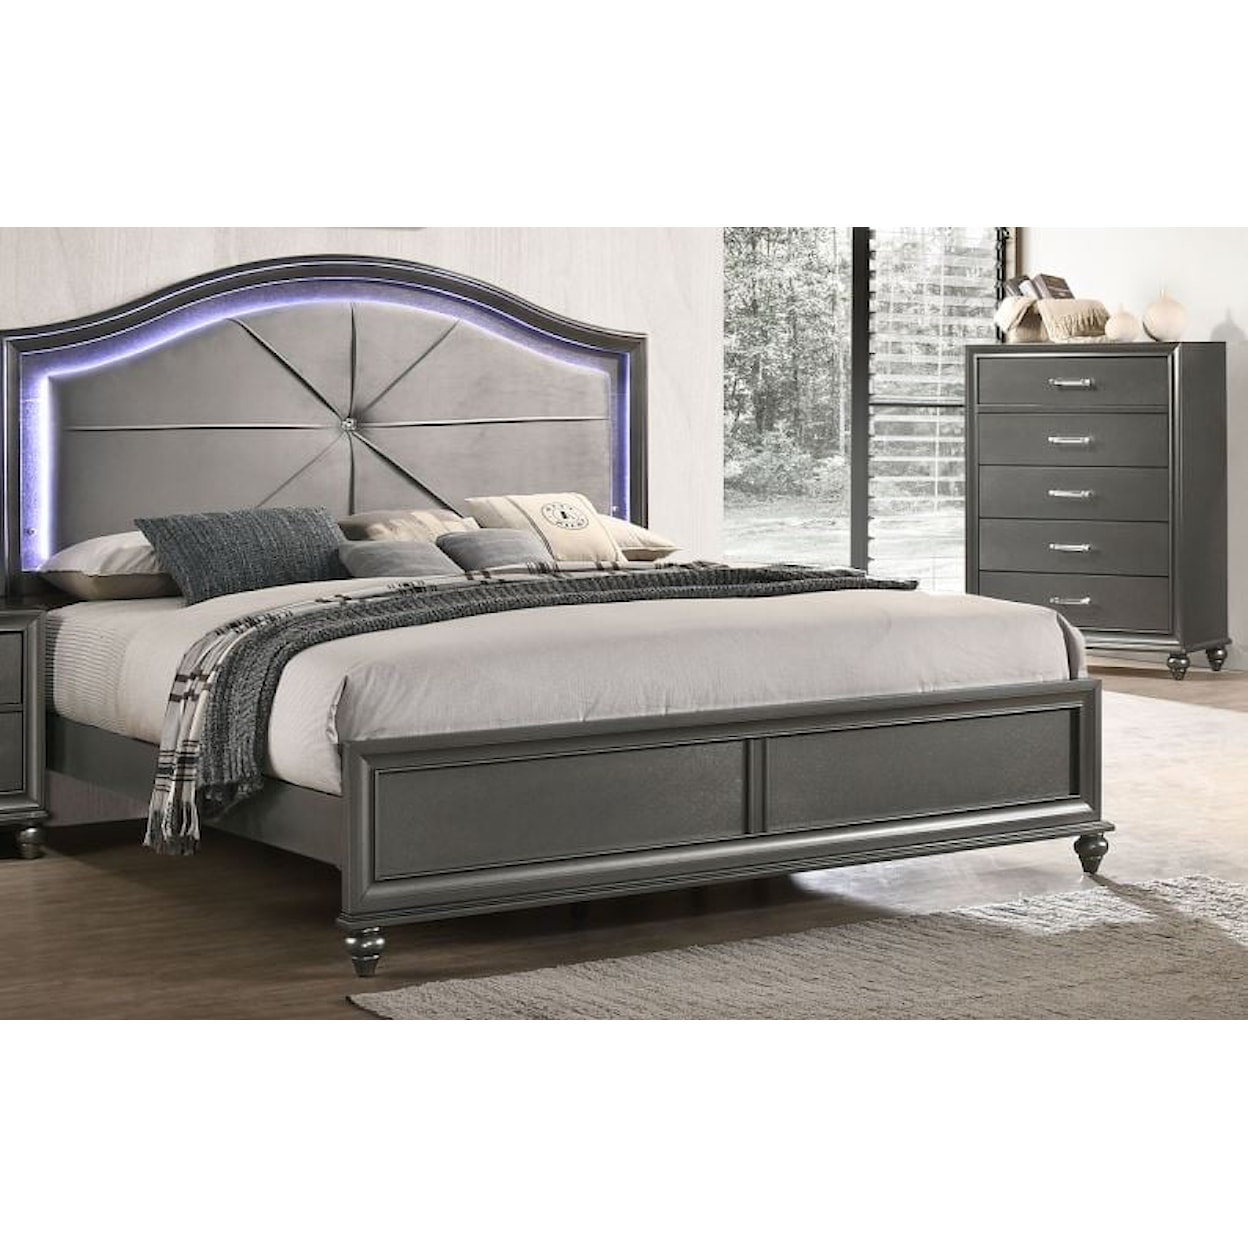 Lifestyle C8318 Queen Size Bed